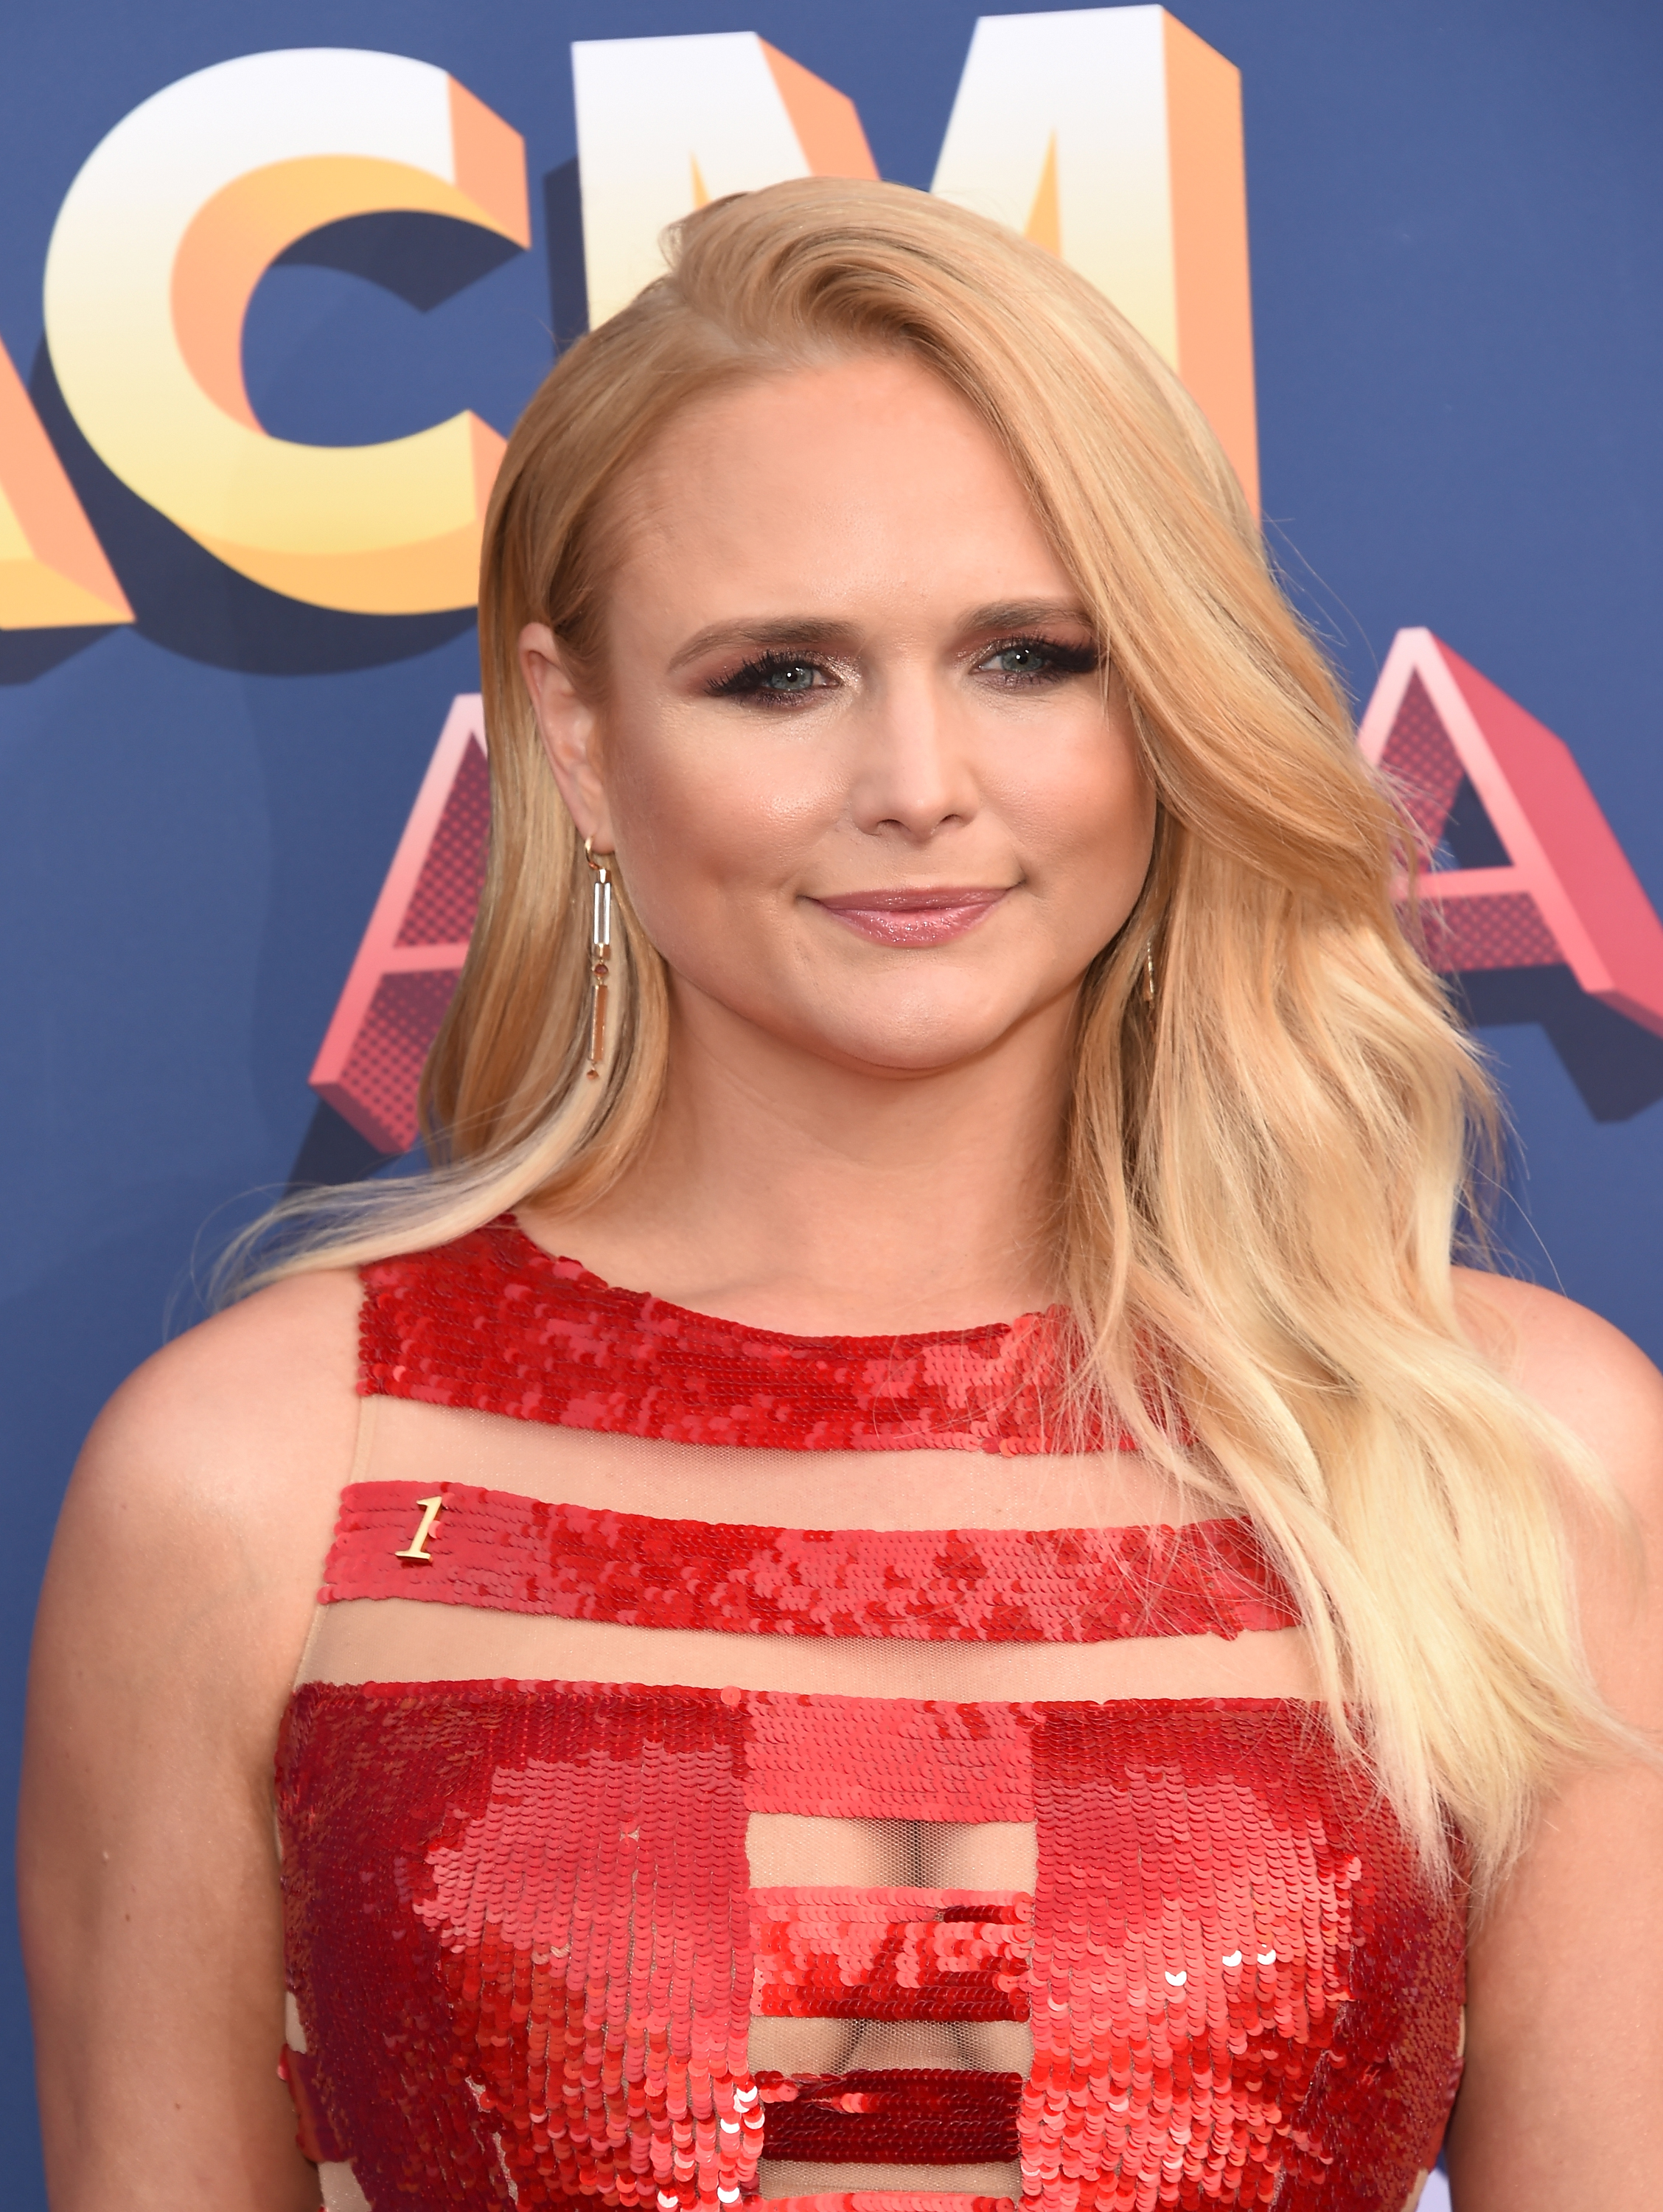 Miranda Lambert attends the 53rd Academy of Country Music Awards on April 15, 2018 in Las Vegas, Nevada. | Source: Getty Images